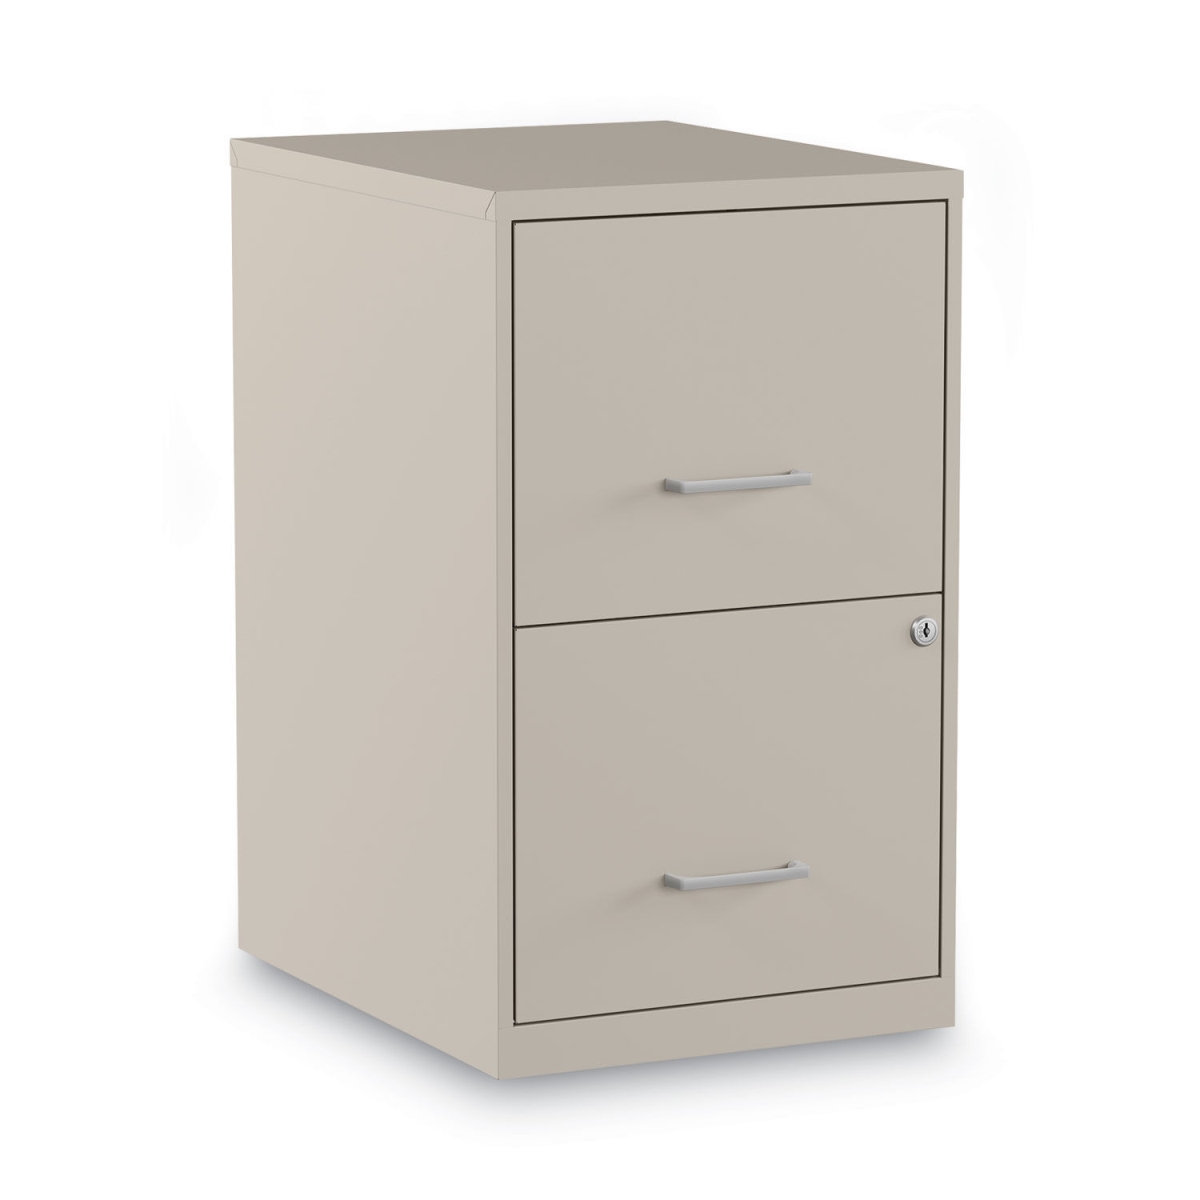 UPC 042167000097 product image for Alera 2806662 Letter Size 2 Drawers File Soho Vertical File Cabinet, Putty | upcitemdb.com